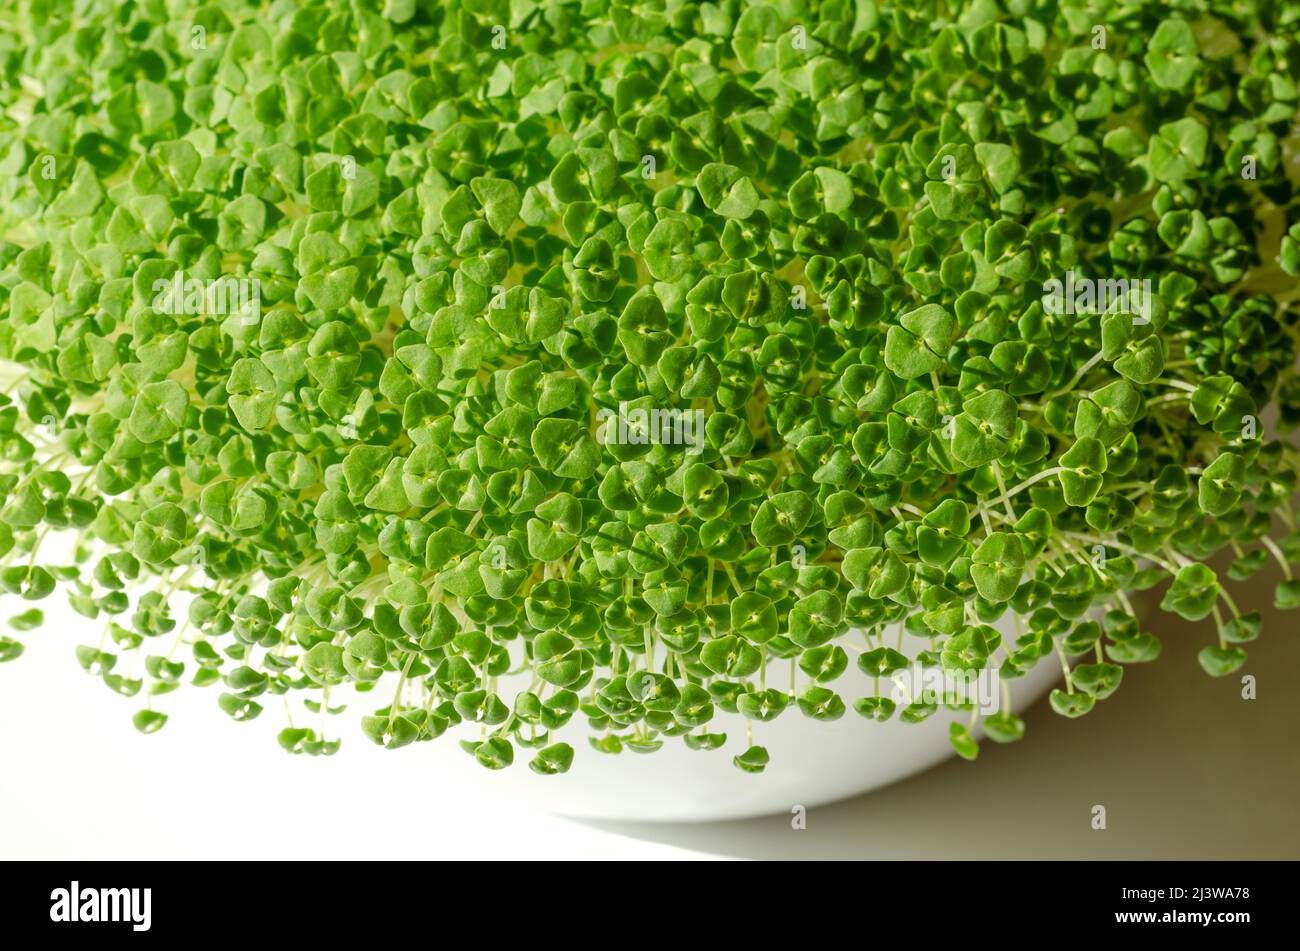 Chia microgreens, growing in a white bowl, from above. Seedlings, young plants and green shoots of Salvia hispanica, a flowering plant. Stock Photo